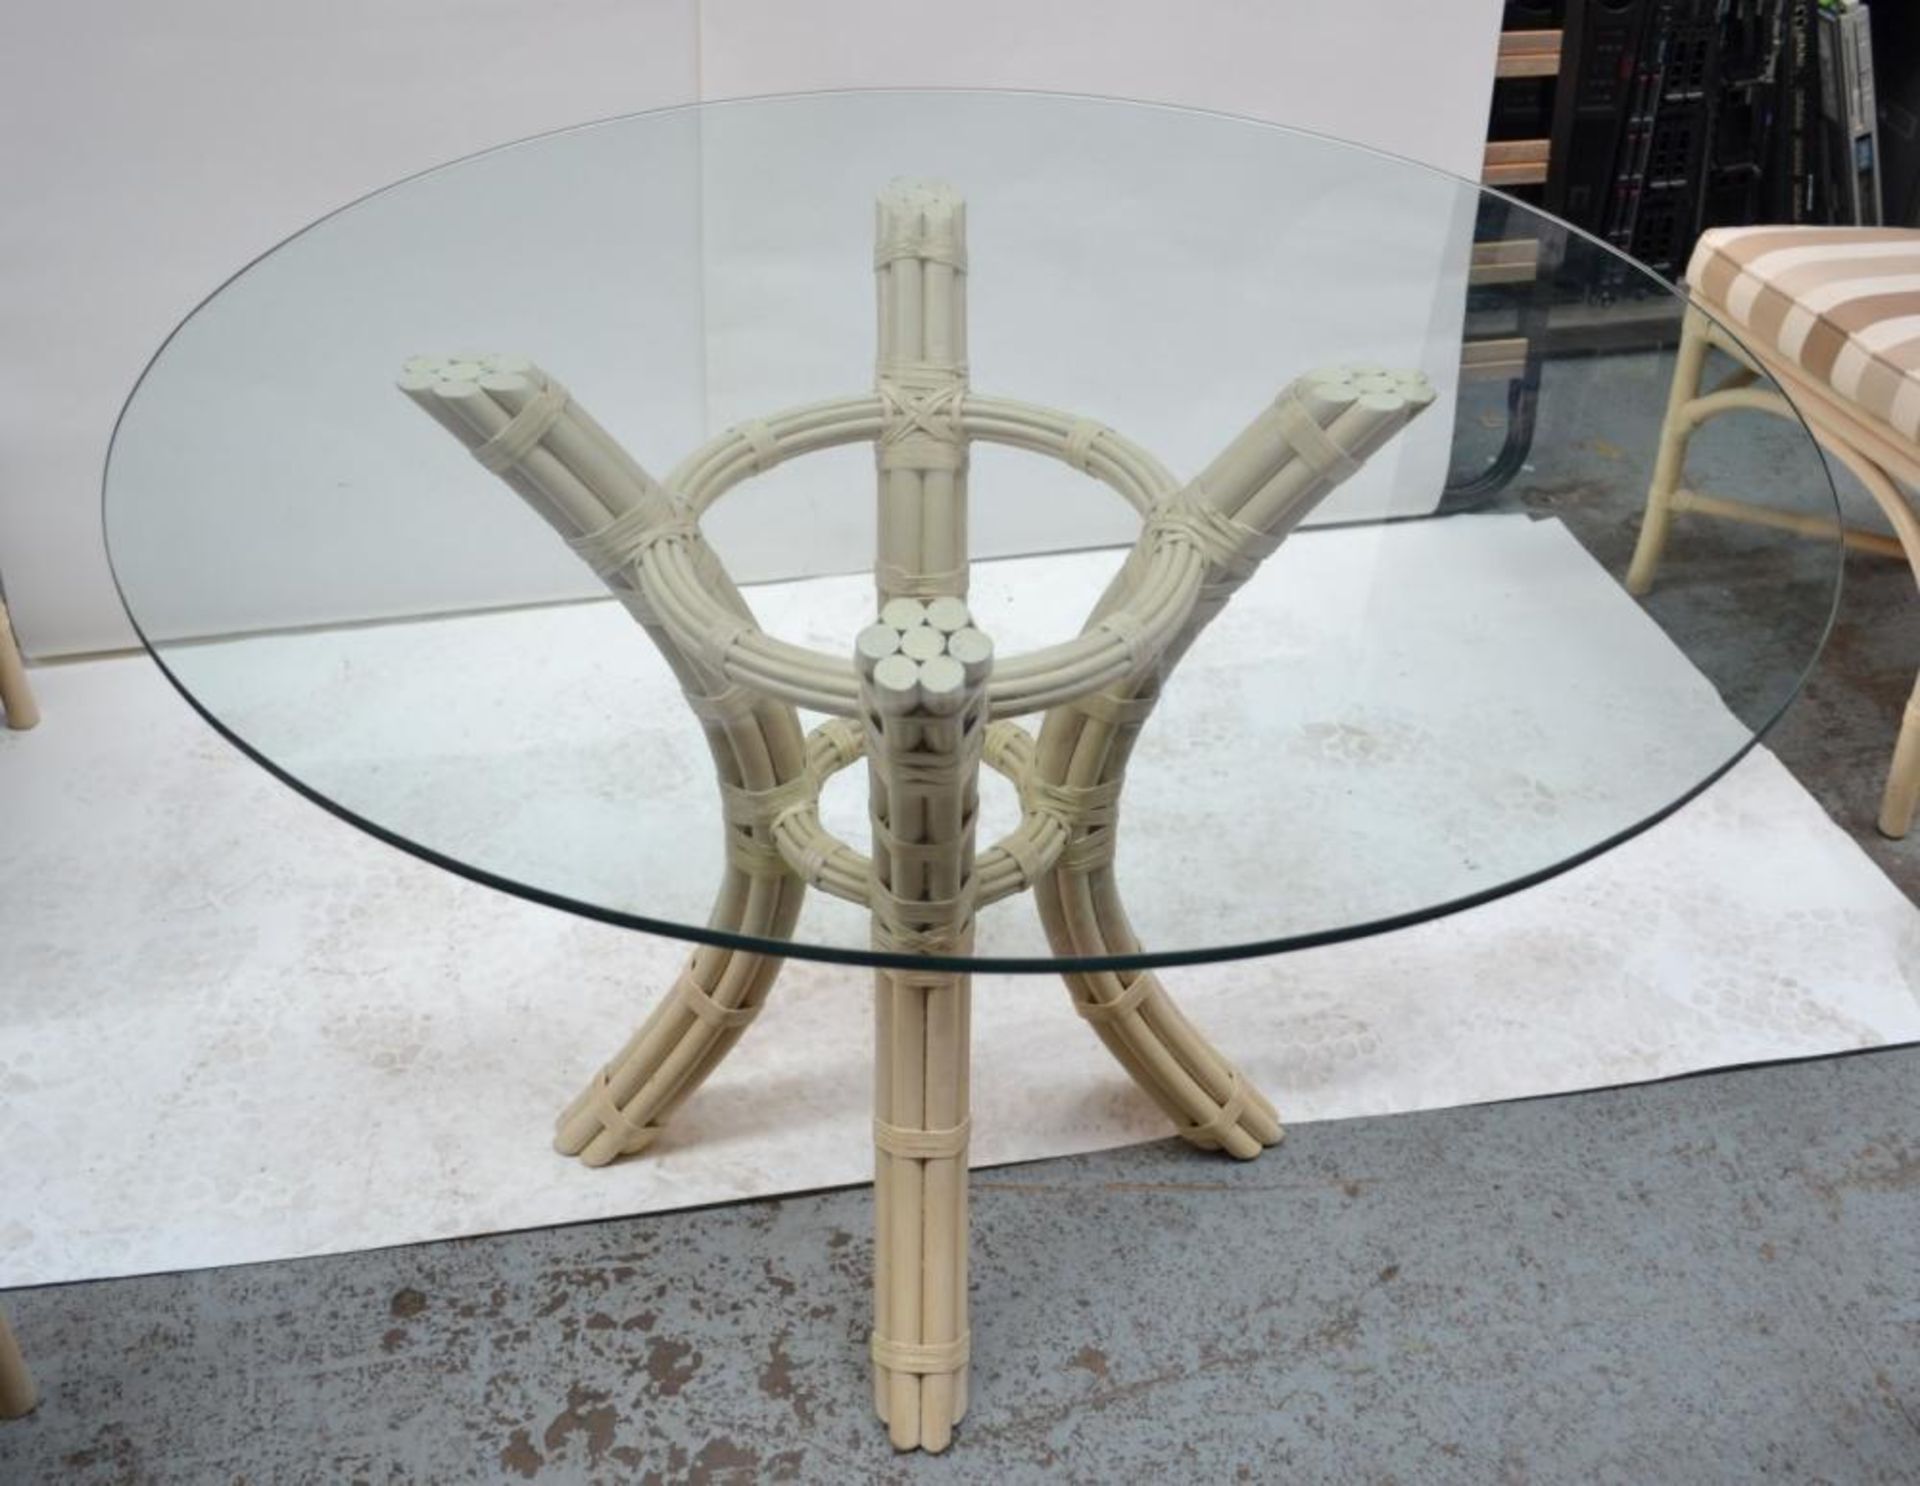 1 x Glass Topped Cane Table with 4 Chairs - Pre-owned In Good Condition - AE010 - CL007 - - Image 3 of 13